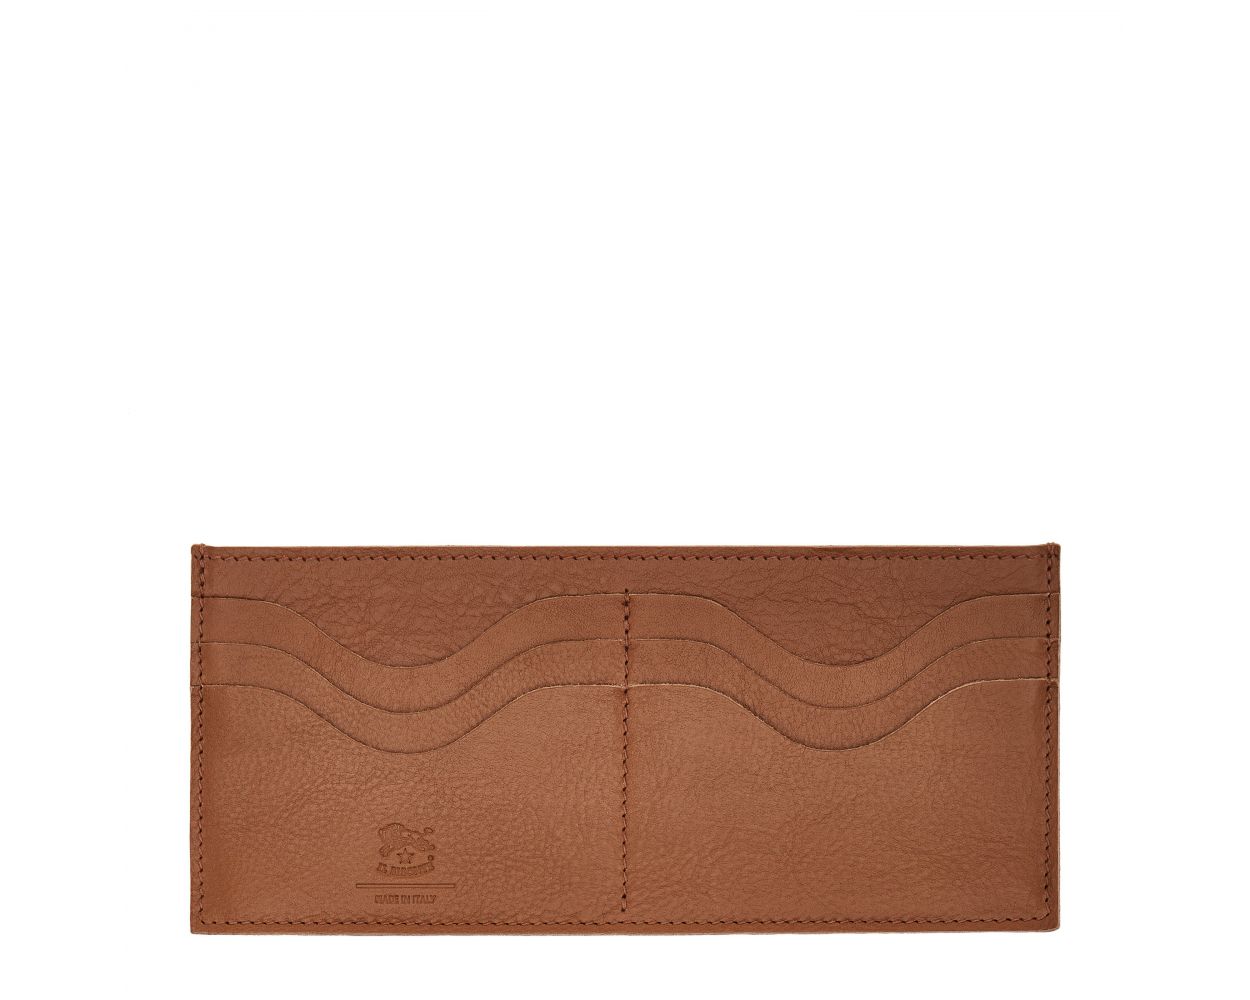 Women's Zip Around Wallet in Soft Vegetable-Tanned Cowhide Leather color - Salina line SZW045 - Chocolate